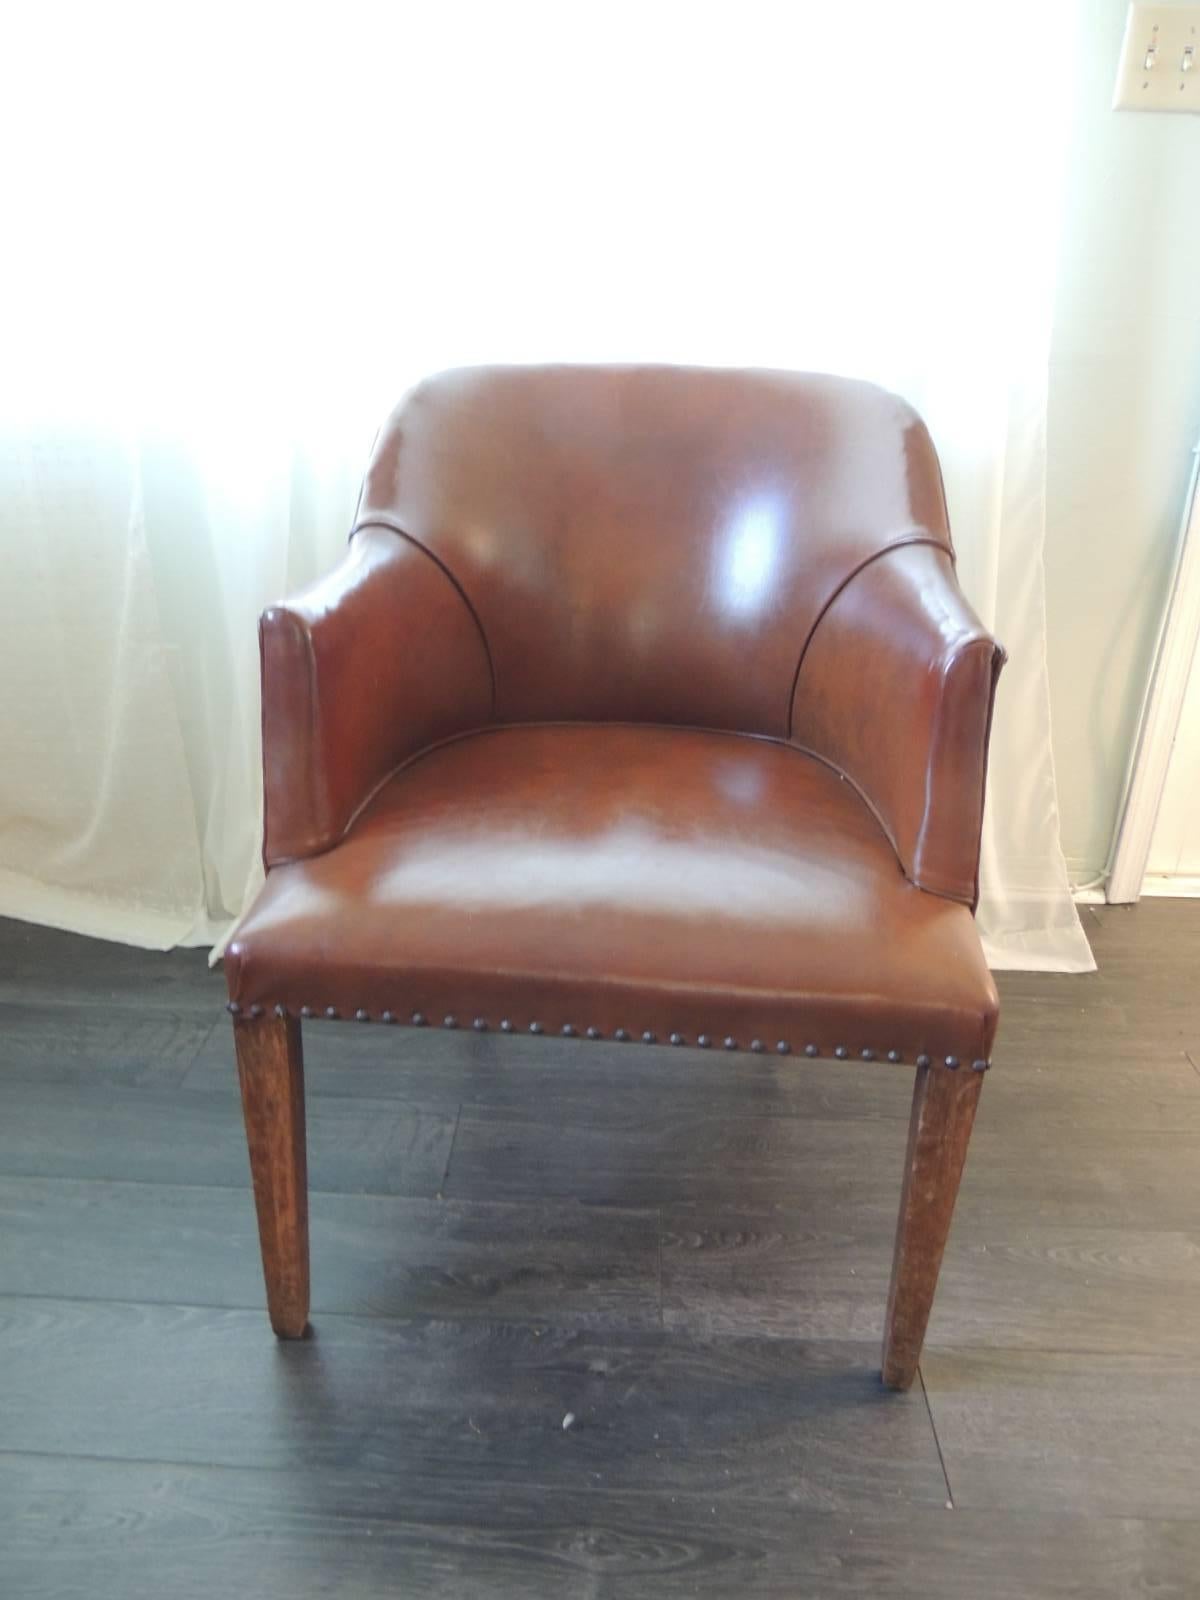 Original leather round back leather armchair with wood legs and original brass nailheads detail. Leather in excellent conditions, no tears. Deep brown color leather. Self welt.
Ideal for a library, desk, living room, bedroom, side chair or